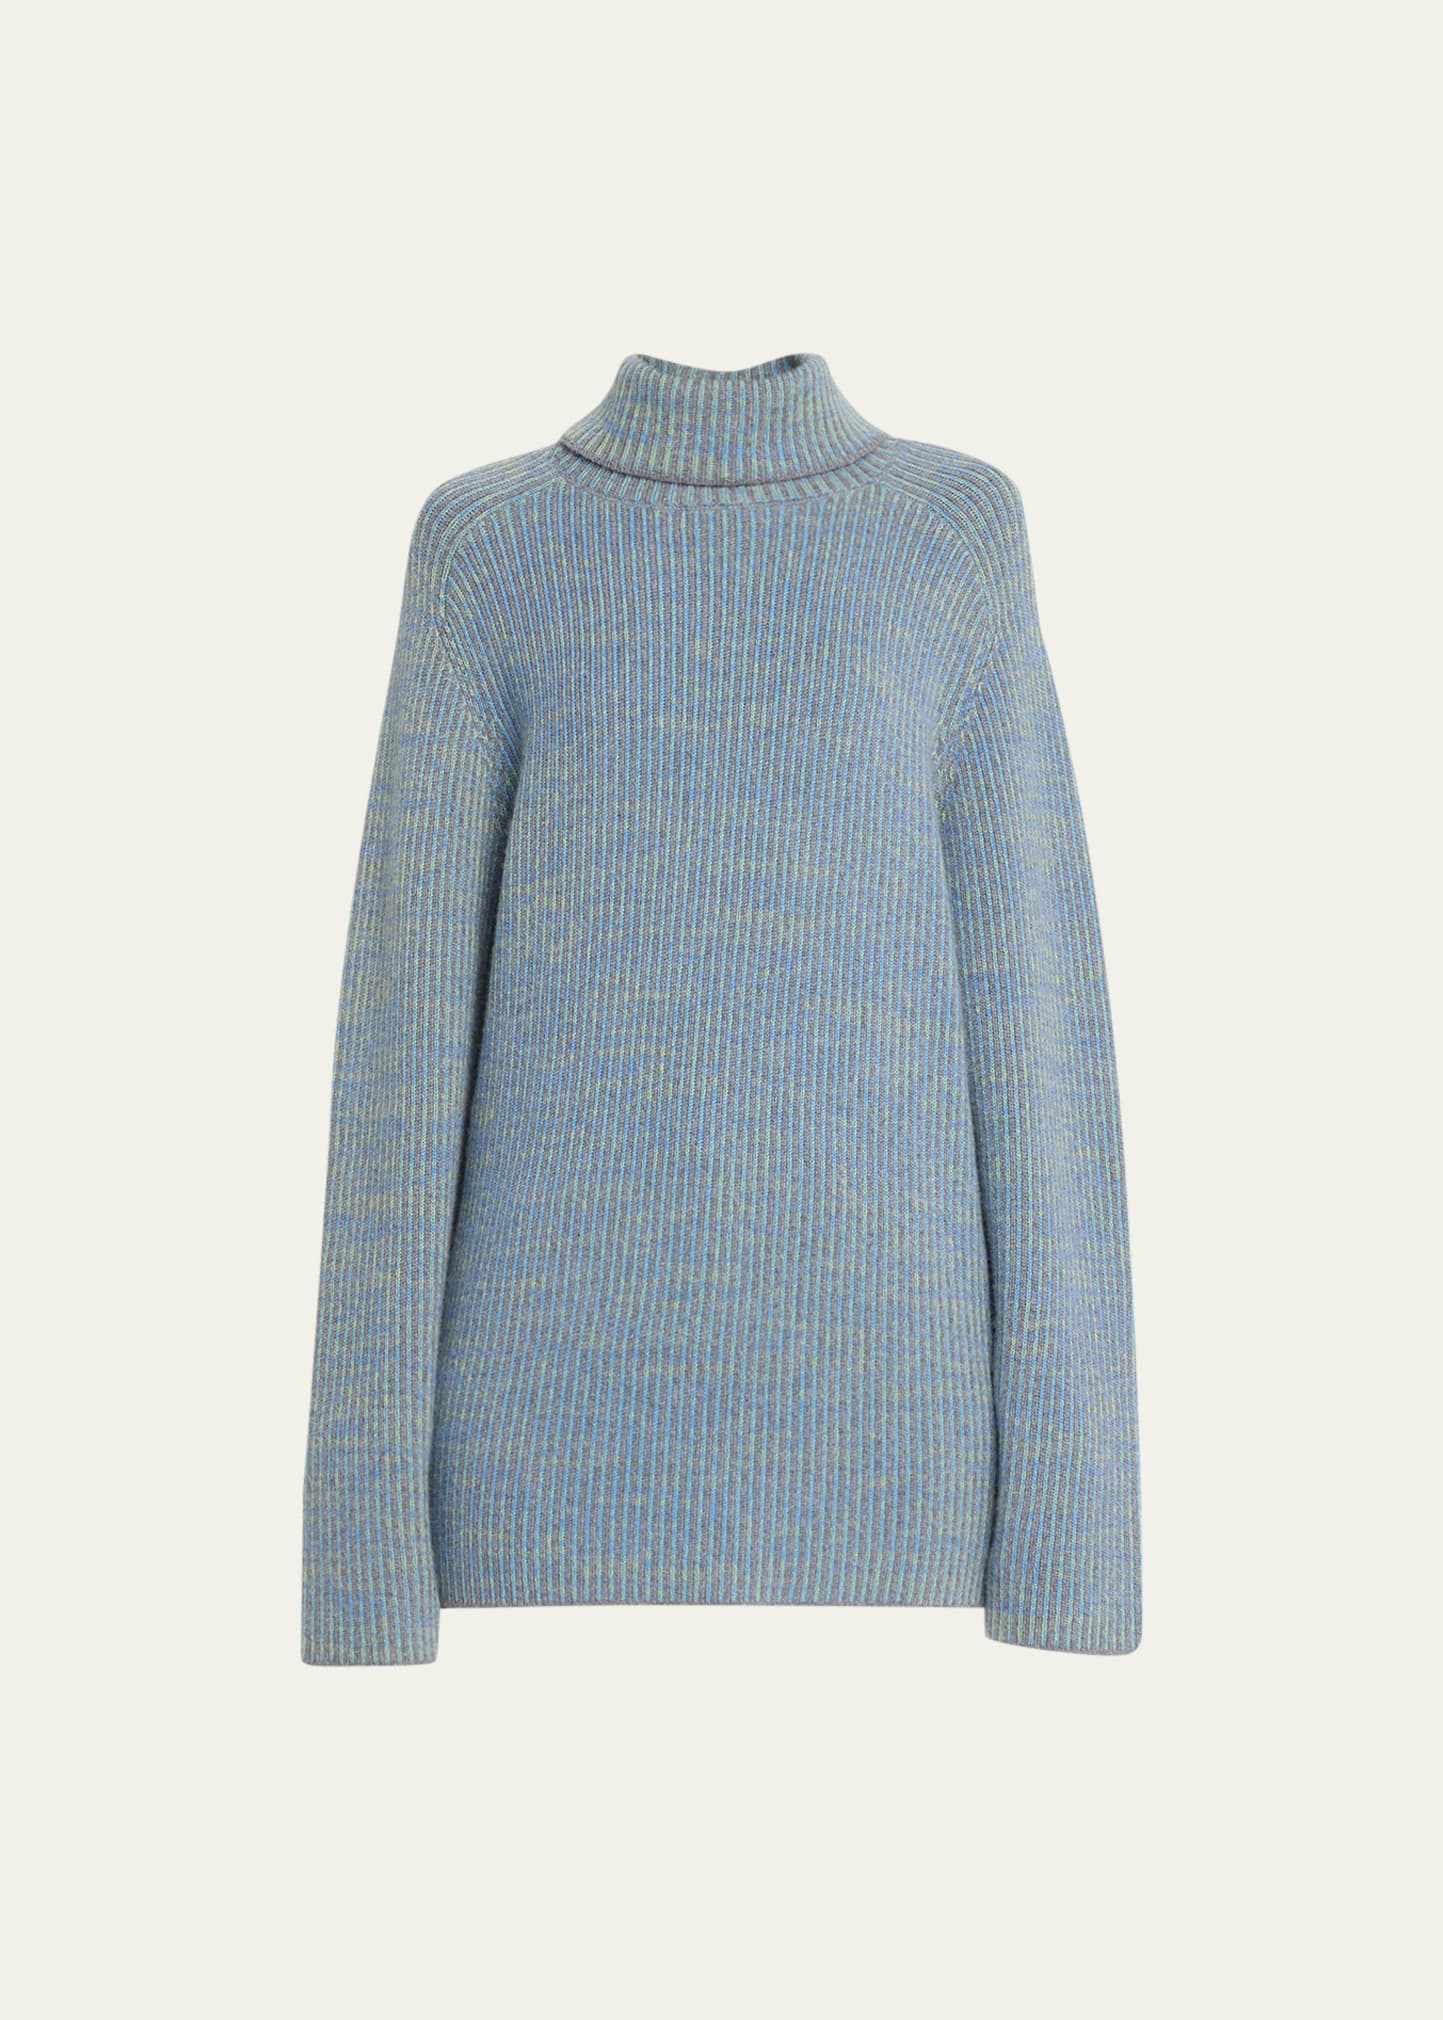 GUEST IN RESIDENCE SPACE-DYED CASHMERE TURTLENECK SWEATER